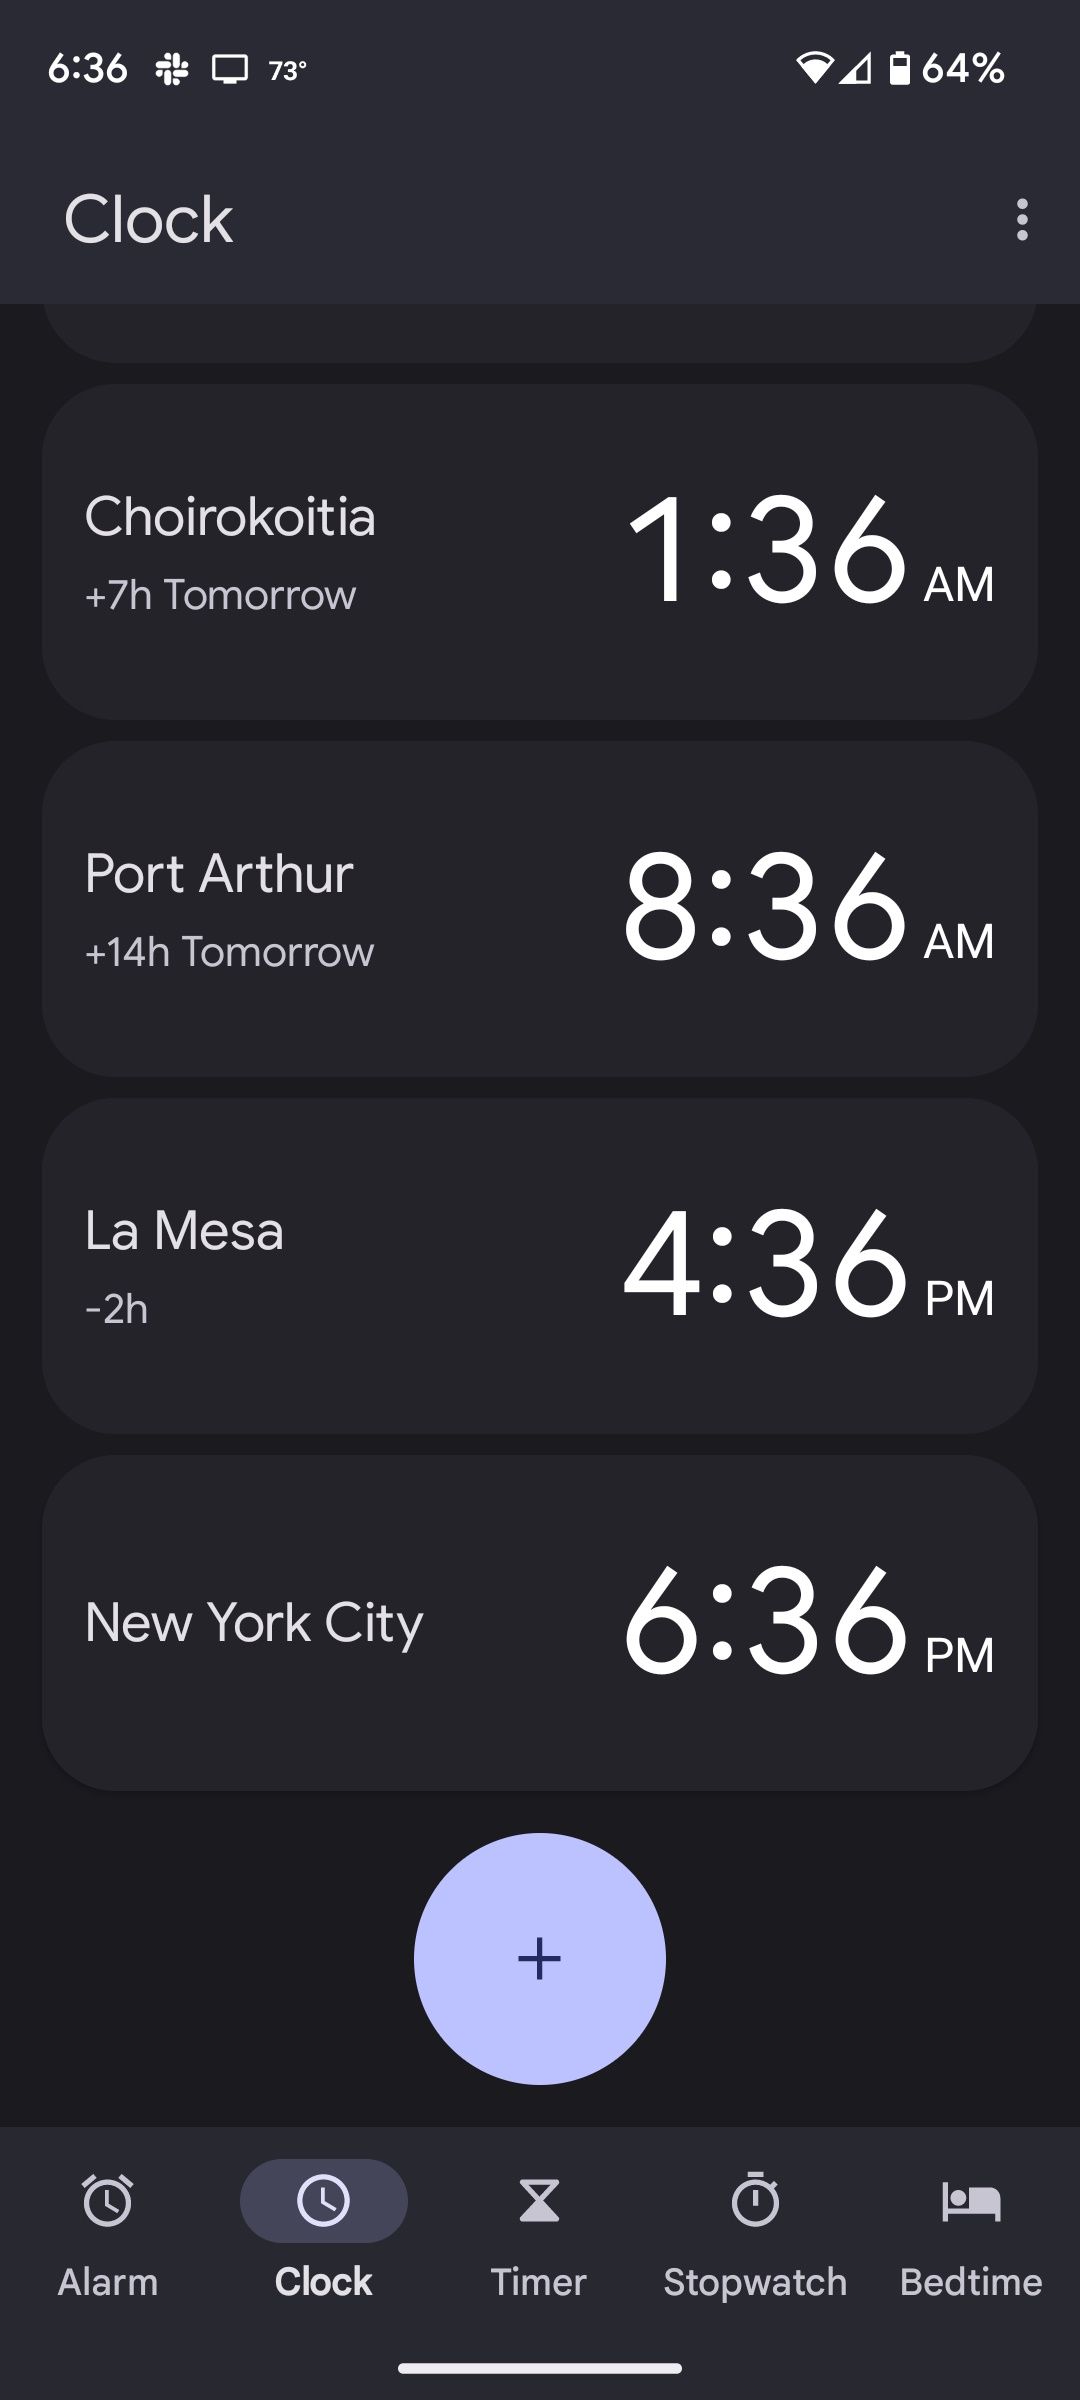 Different cities and time zones represented in the Android Clock app